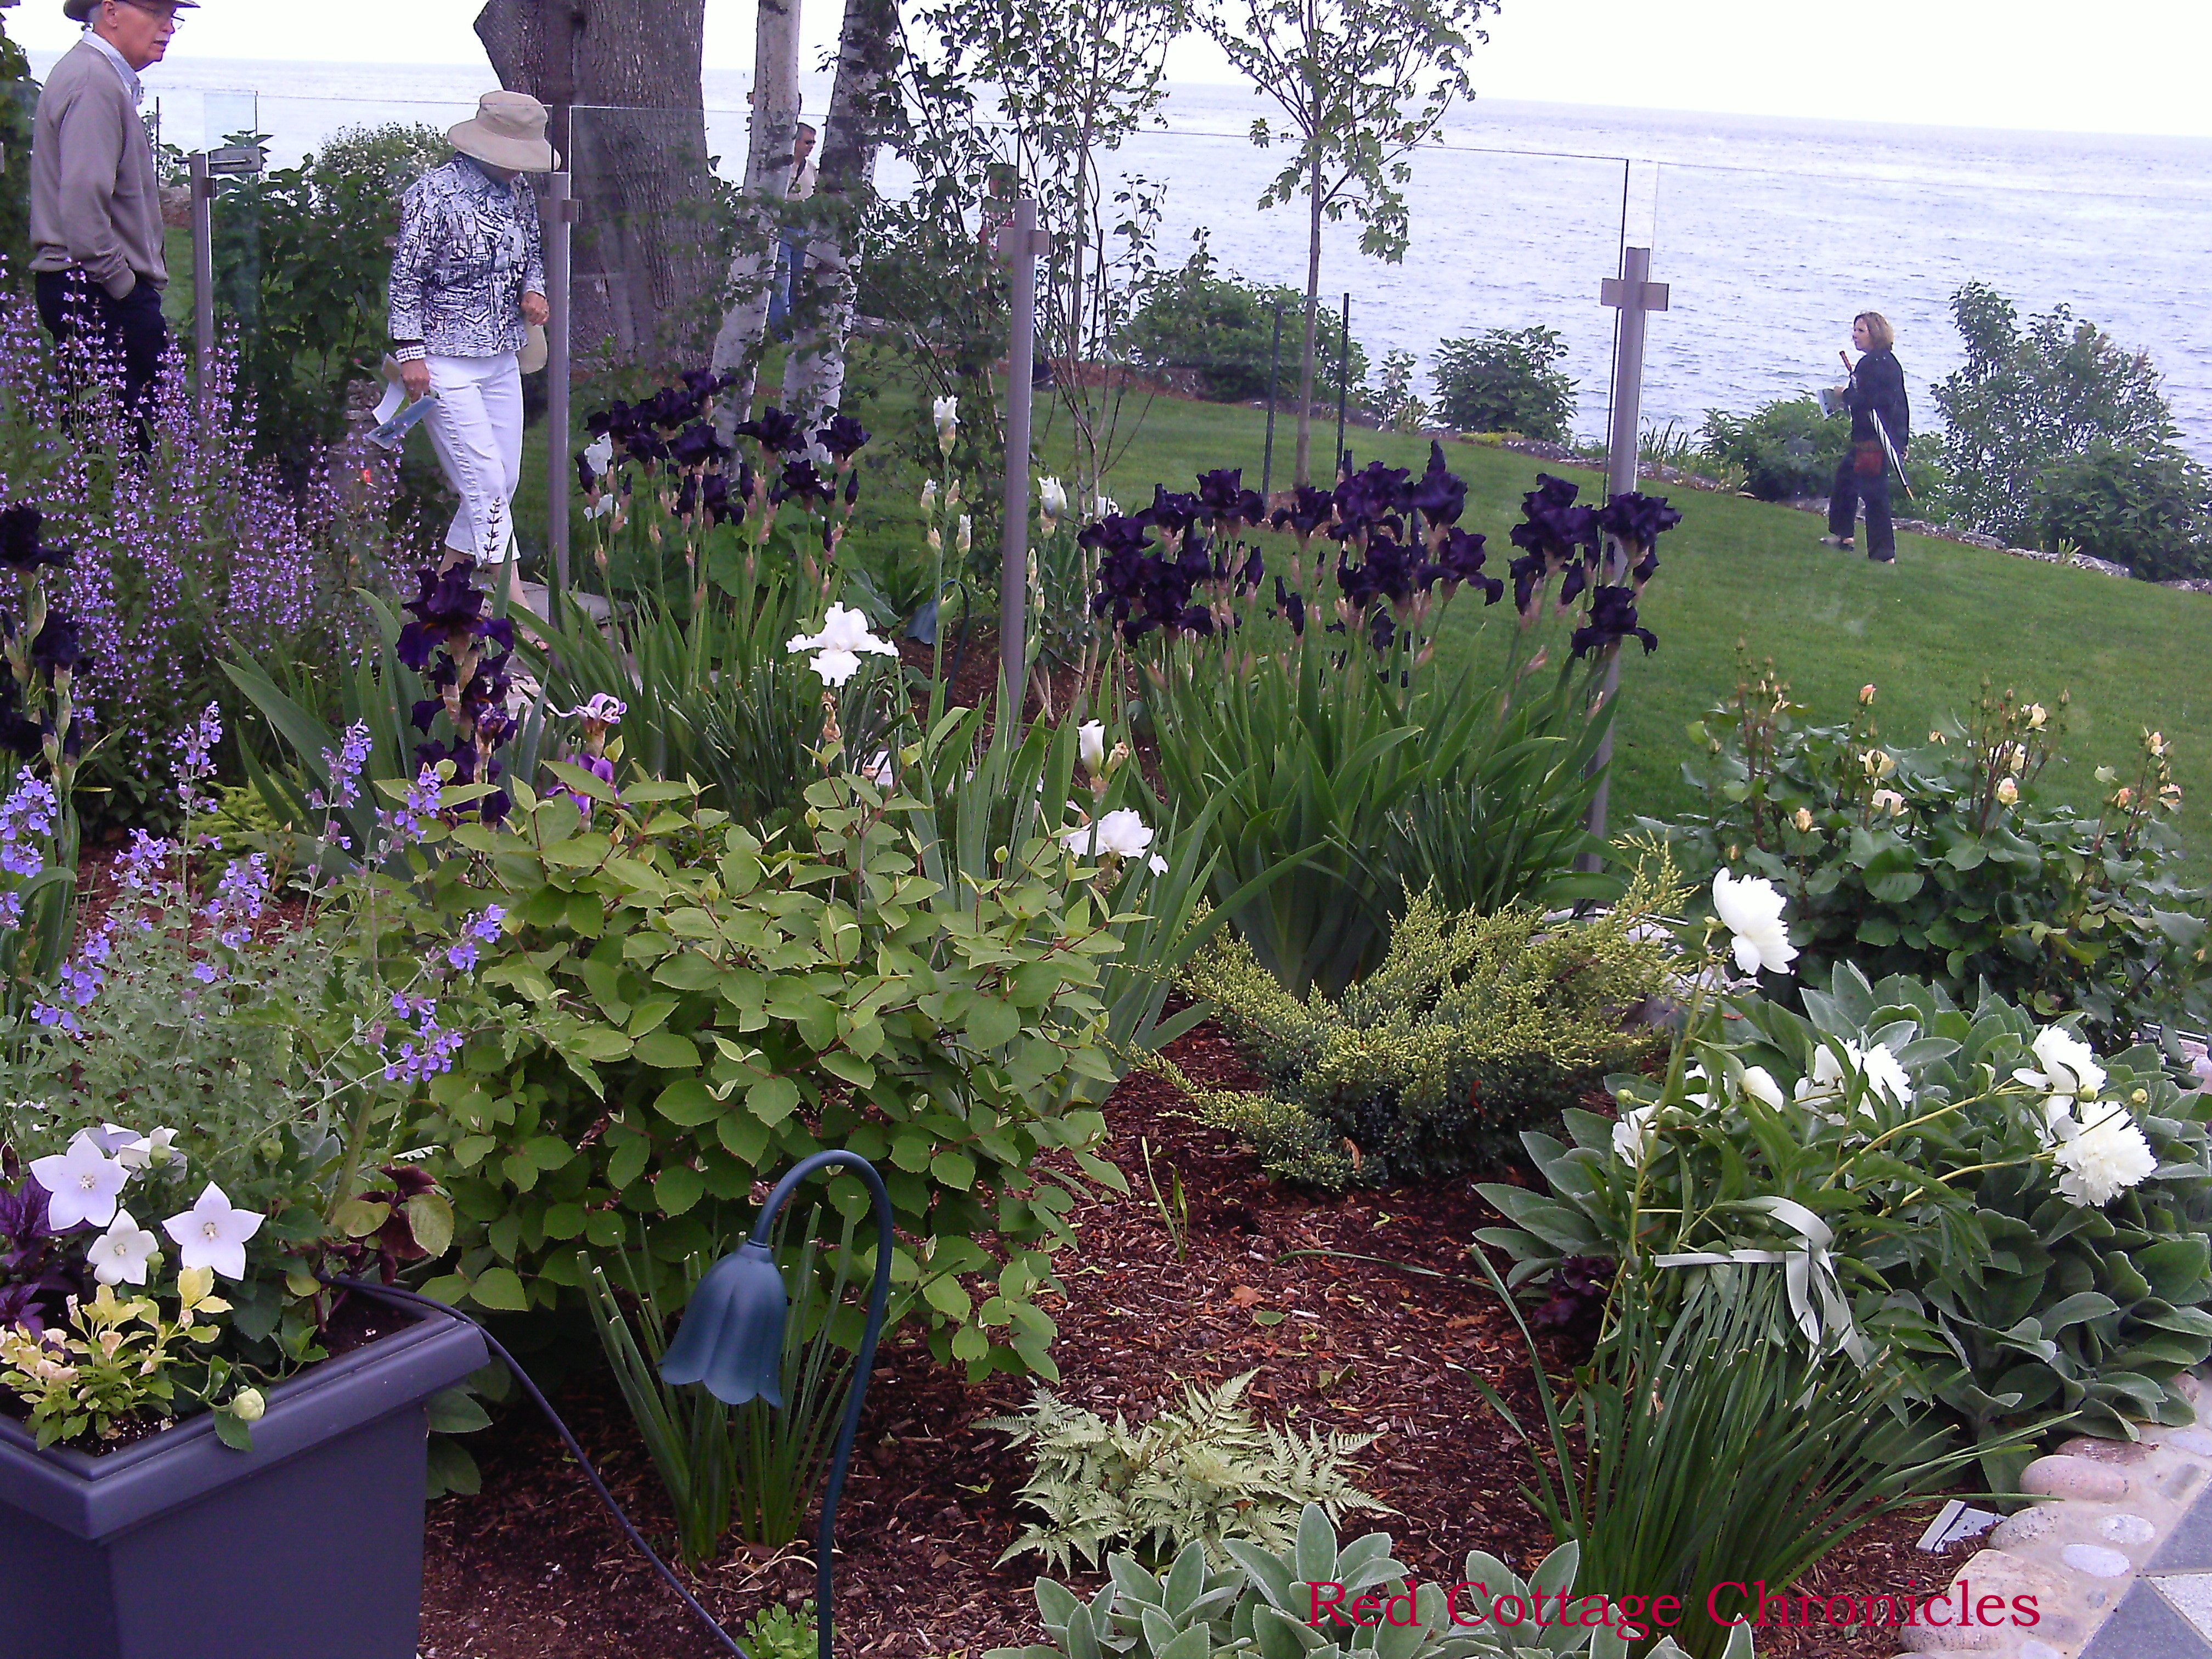 gardens and view of Lake Ontario on a private yard